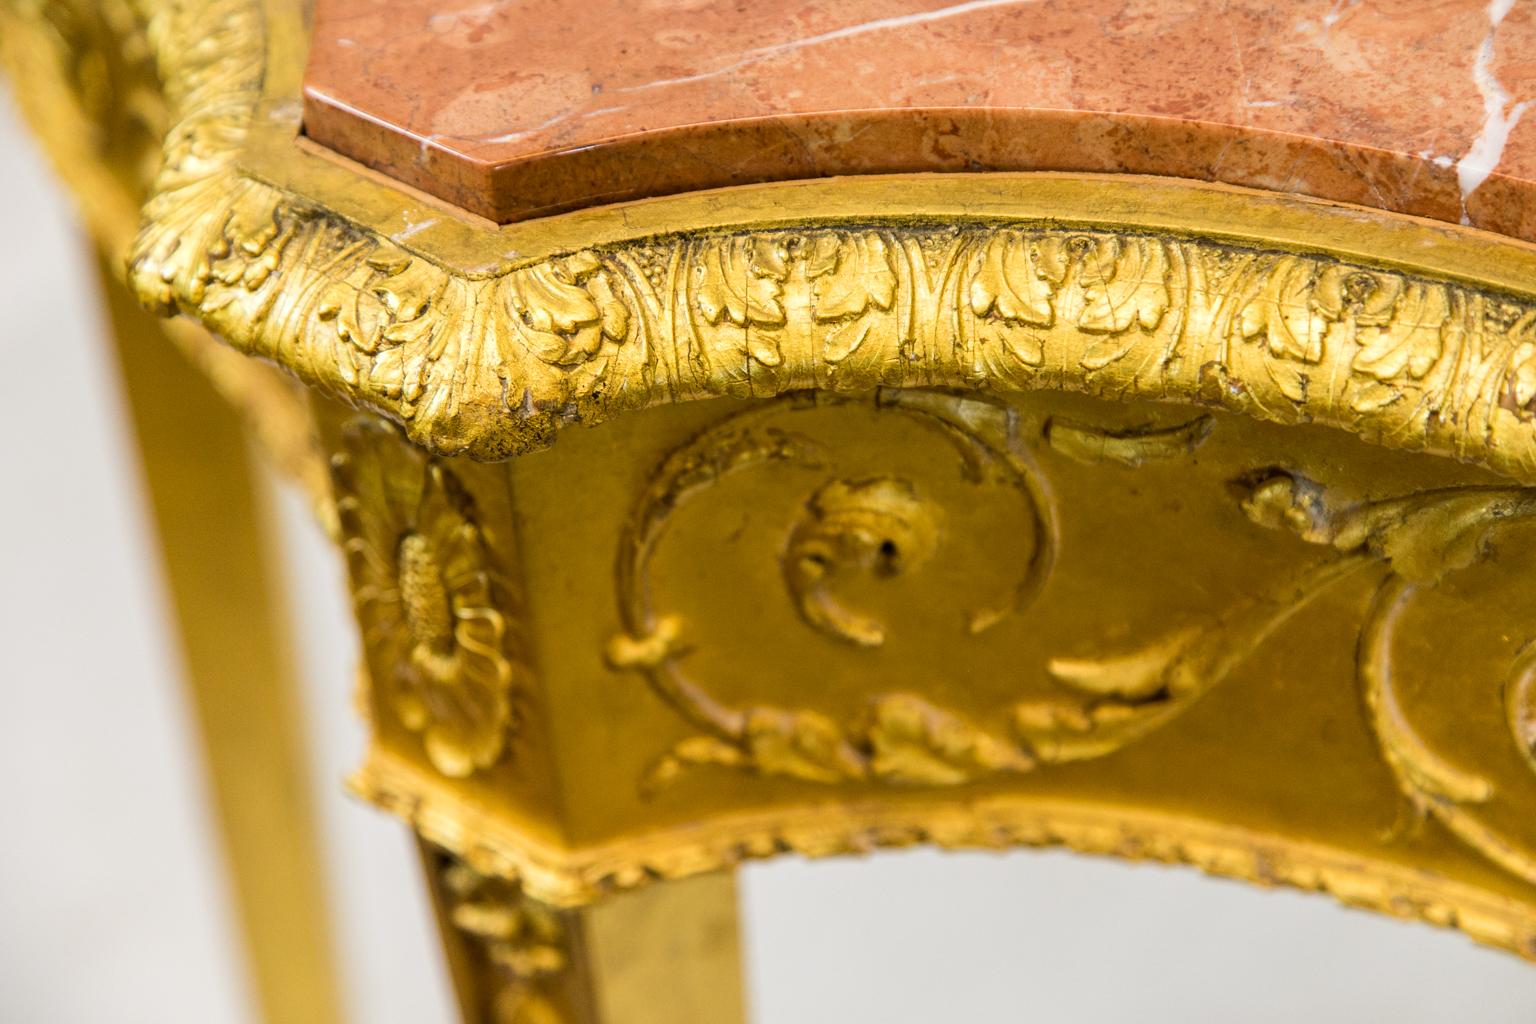 Serpentine English Marble-Top Gilt Console Table For Sale 2